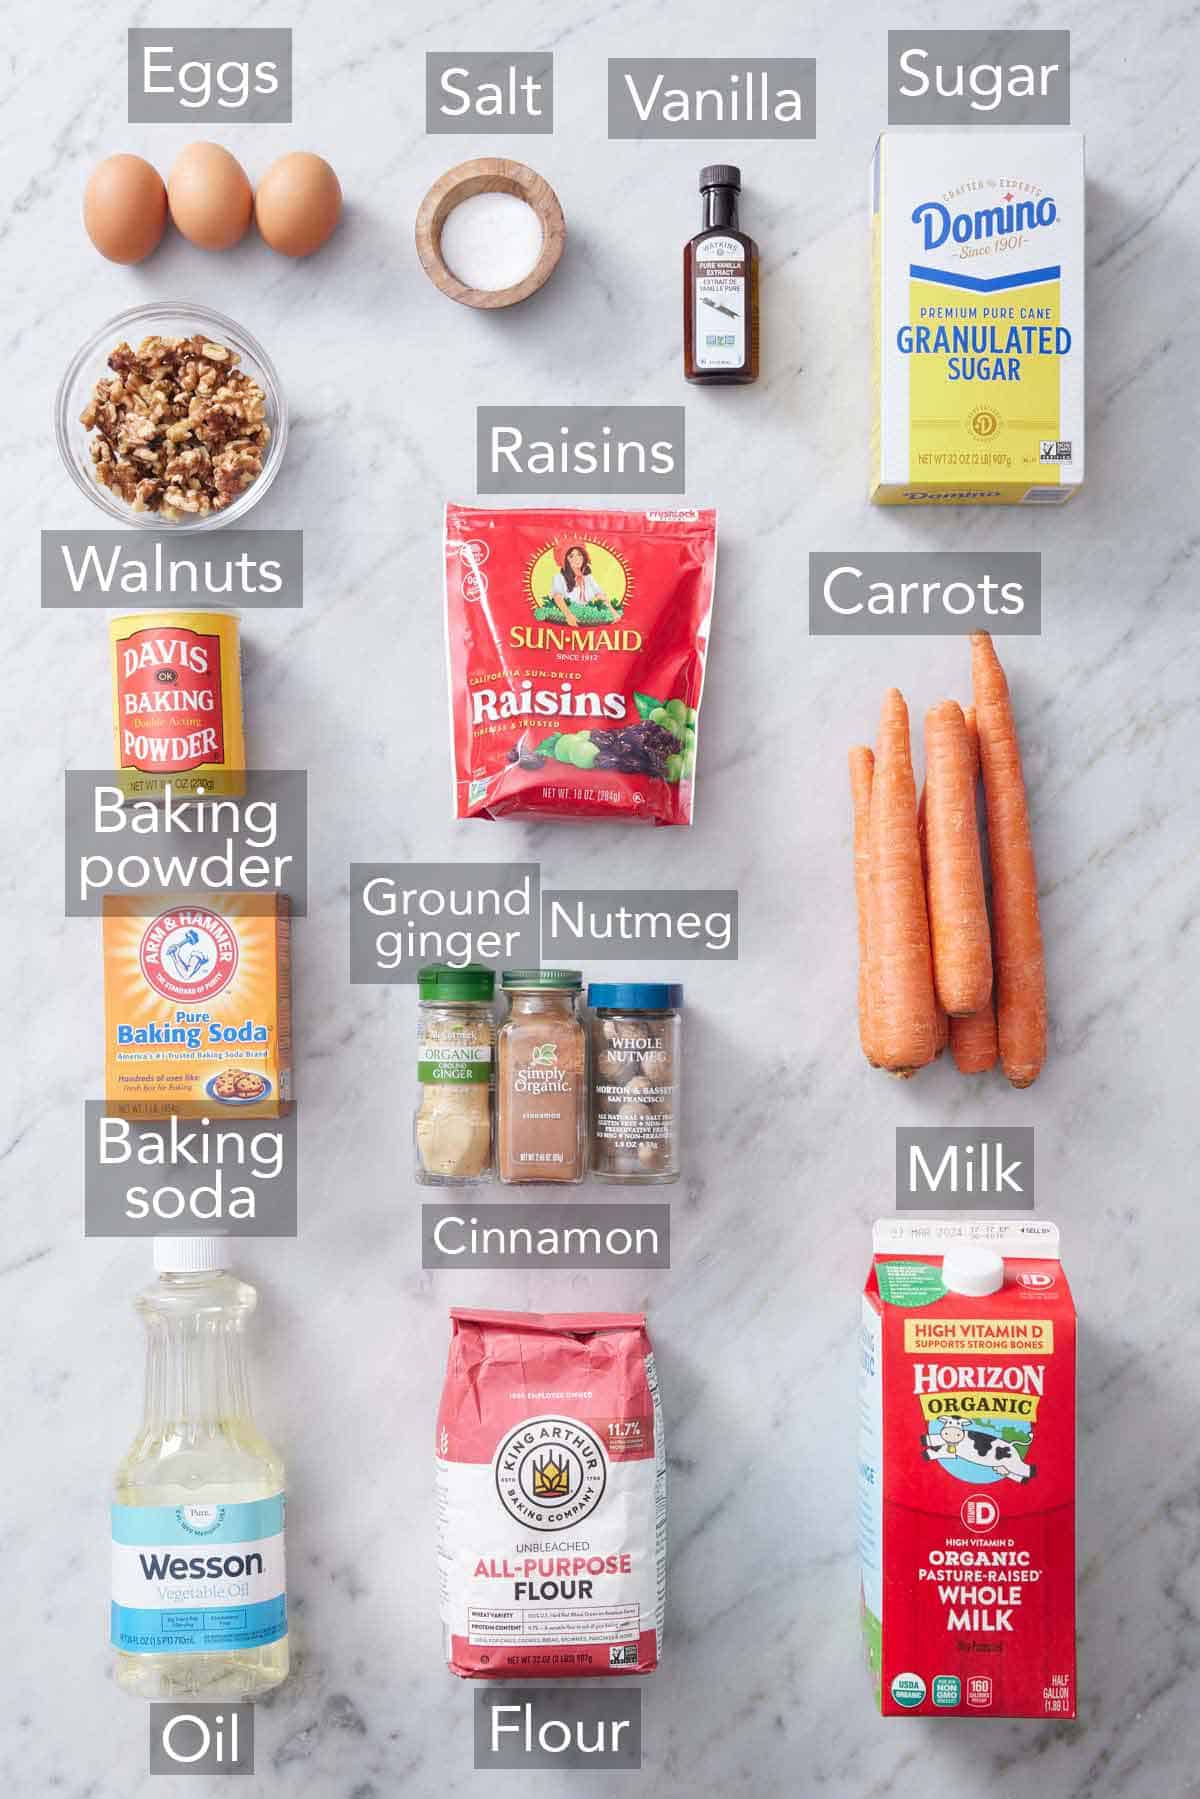 Ingredients needed to make carrot muffins.